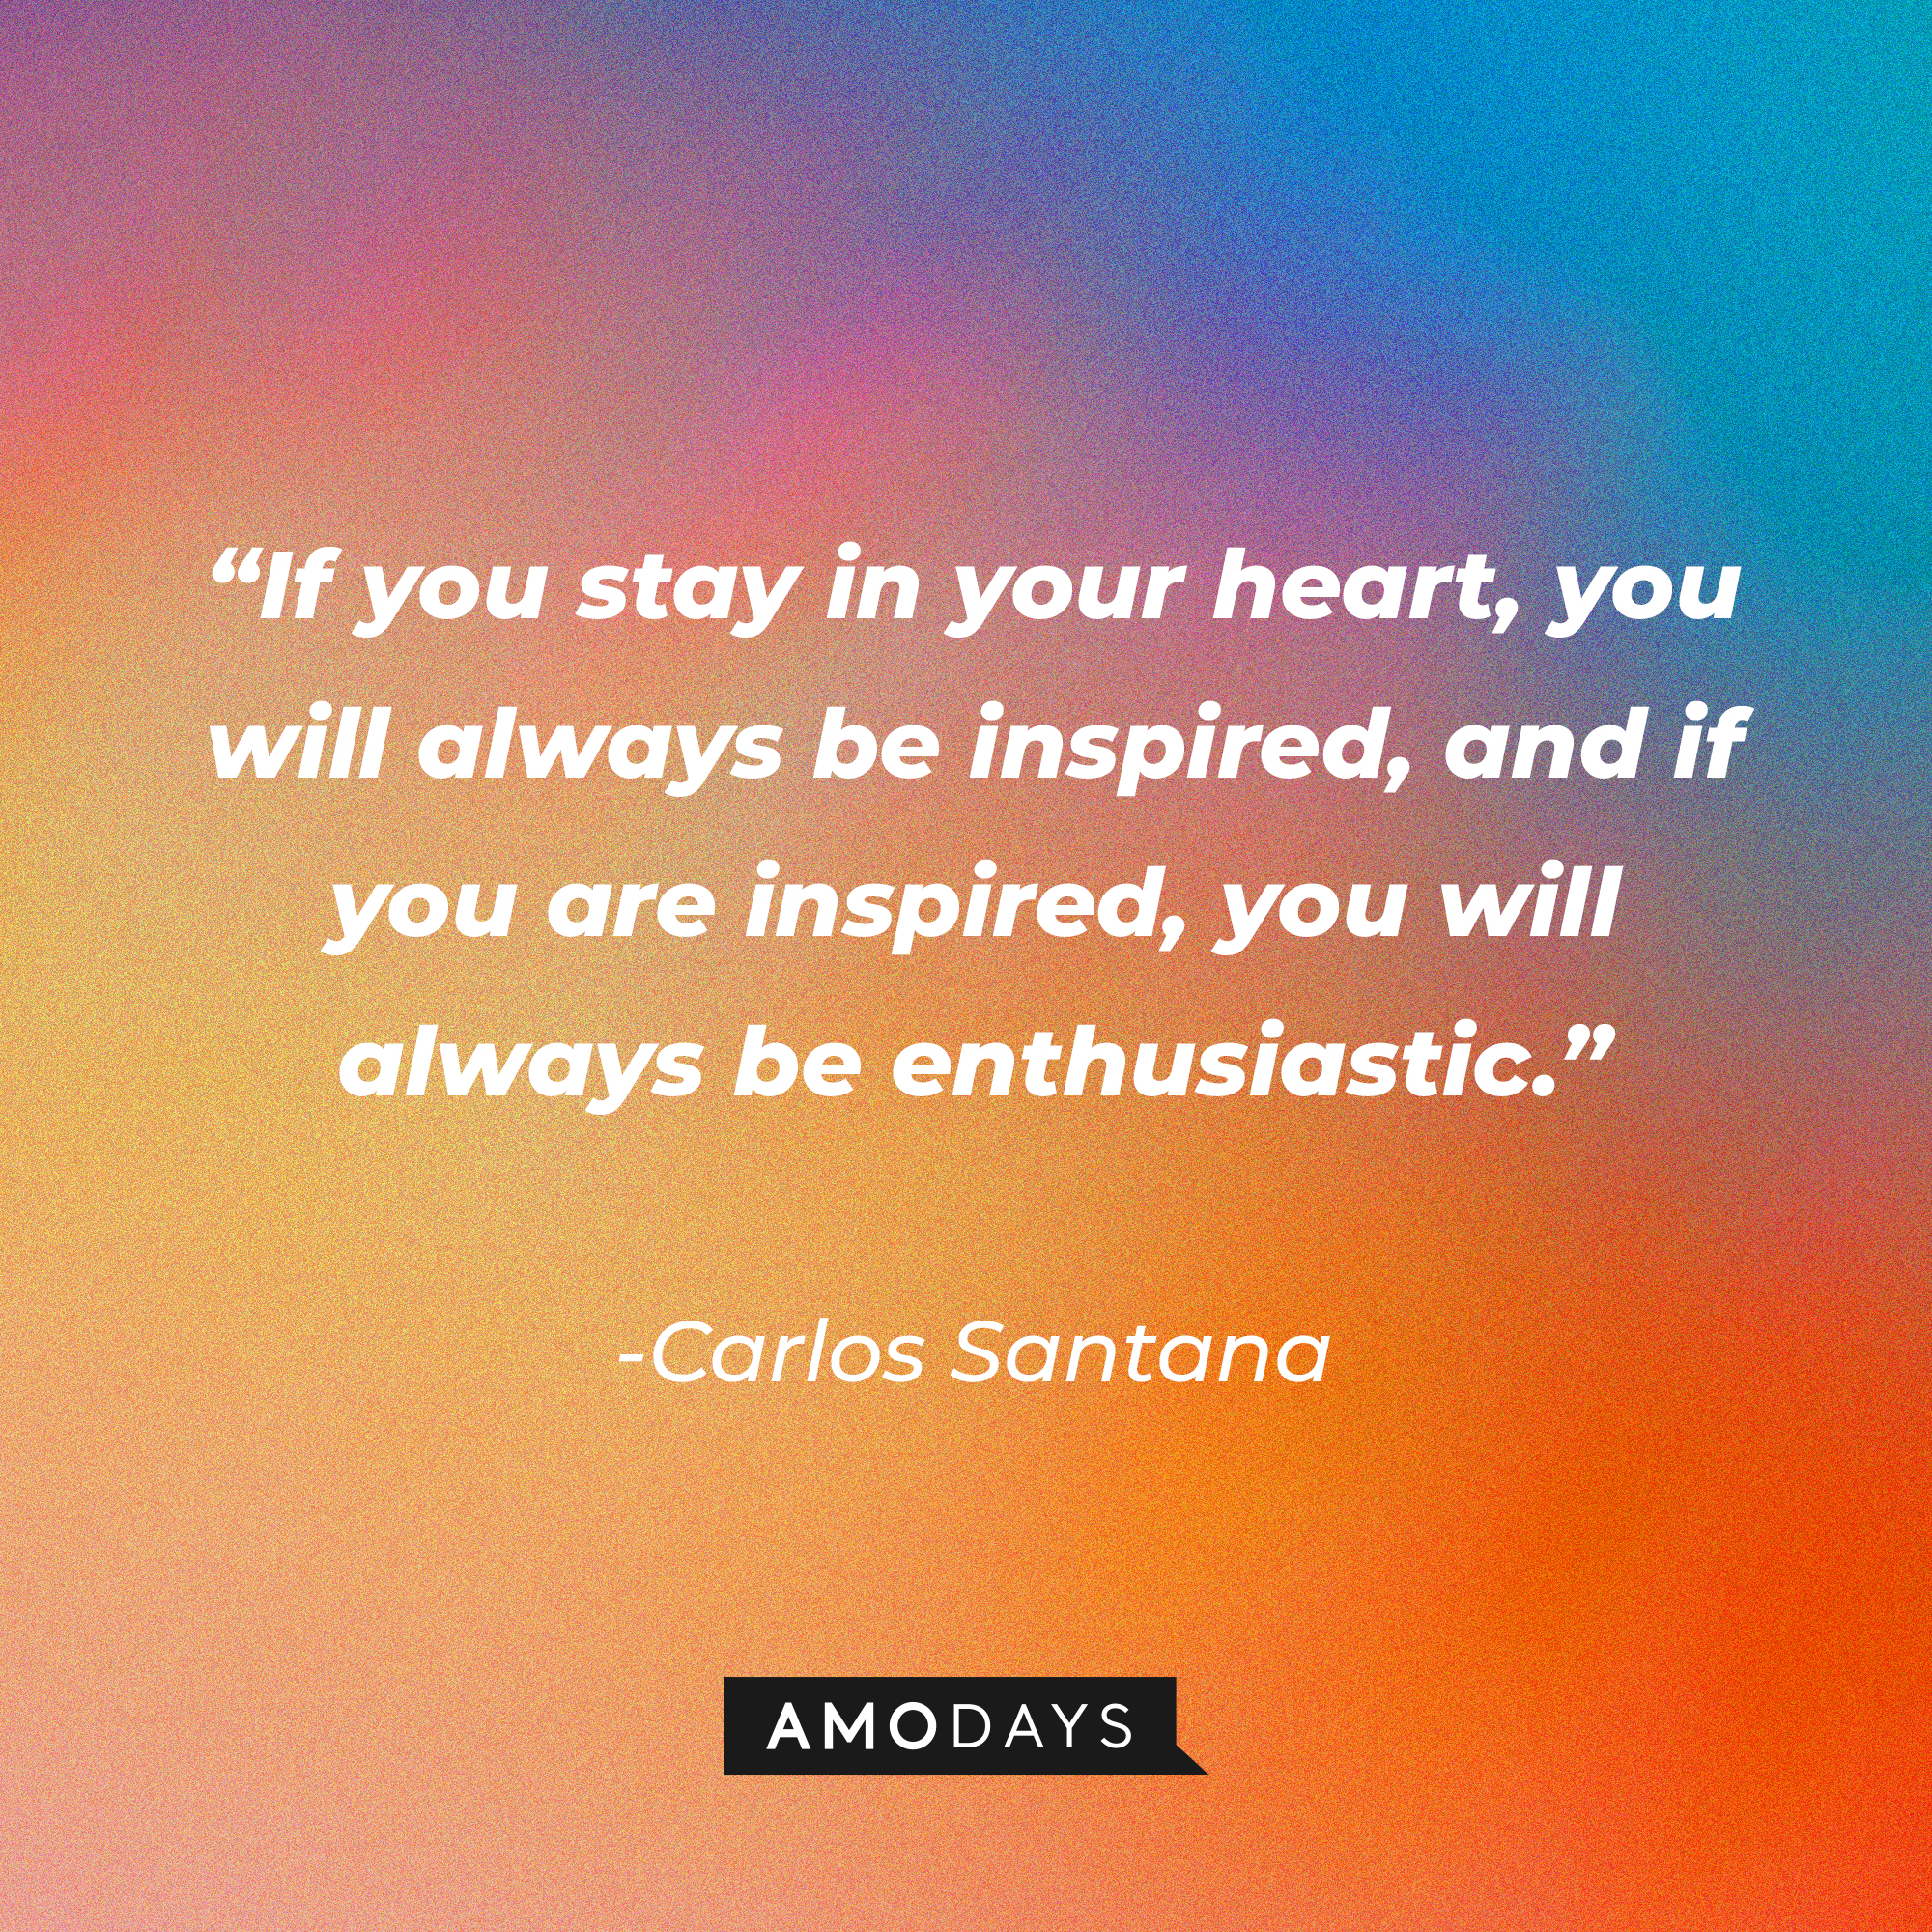 Carlos Santana’s quote: "If you stay in your heart you will always be inspired and if you are inspired you will always be enthusiastic.┃Source: AmoDays